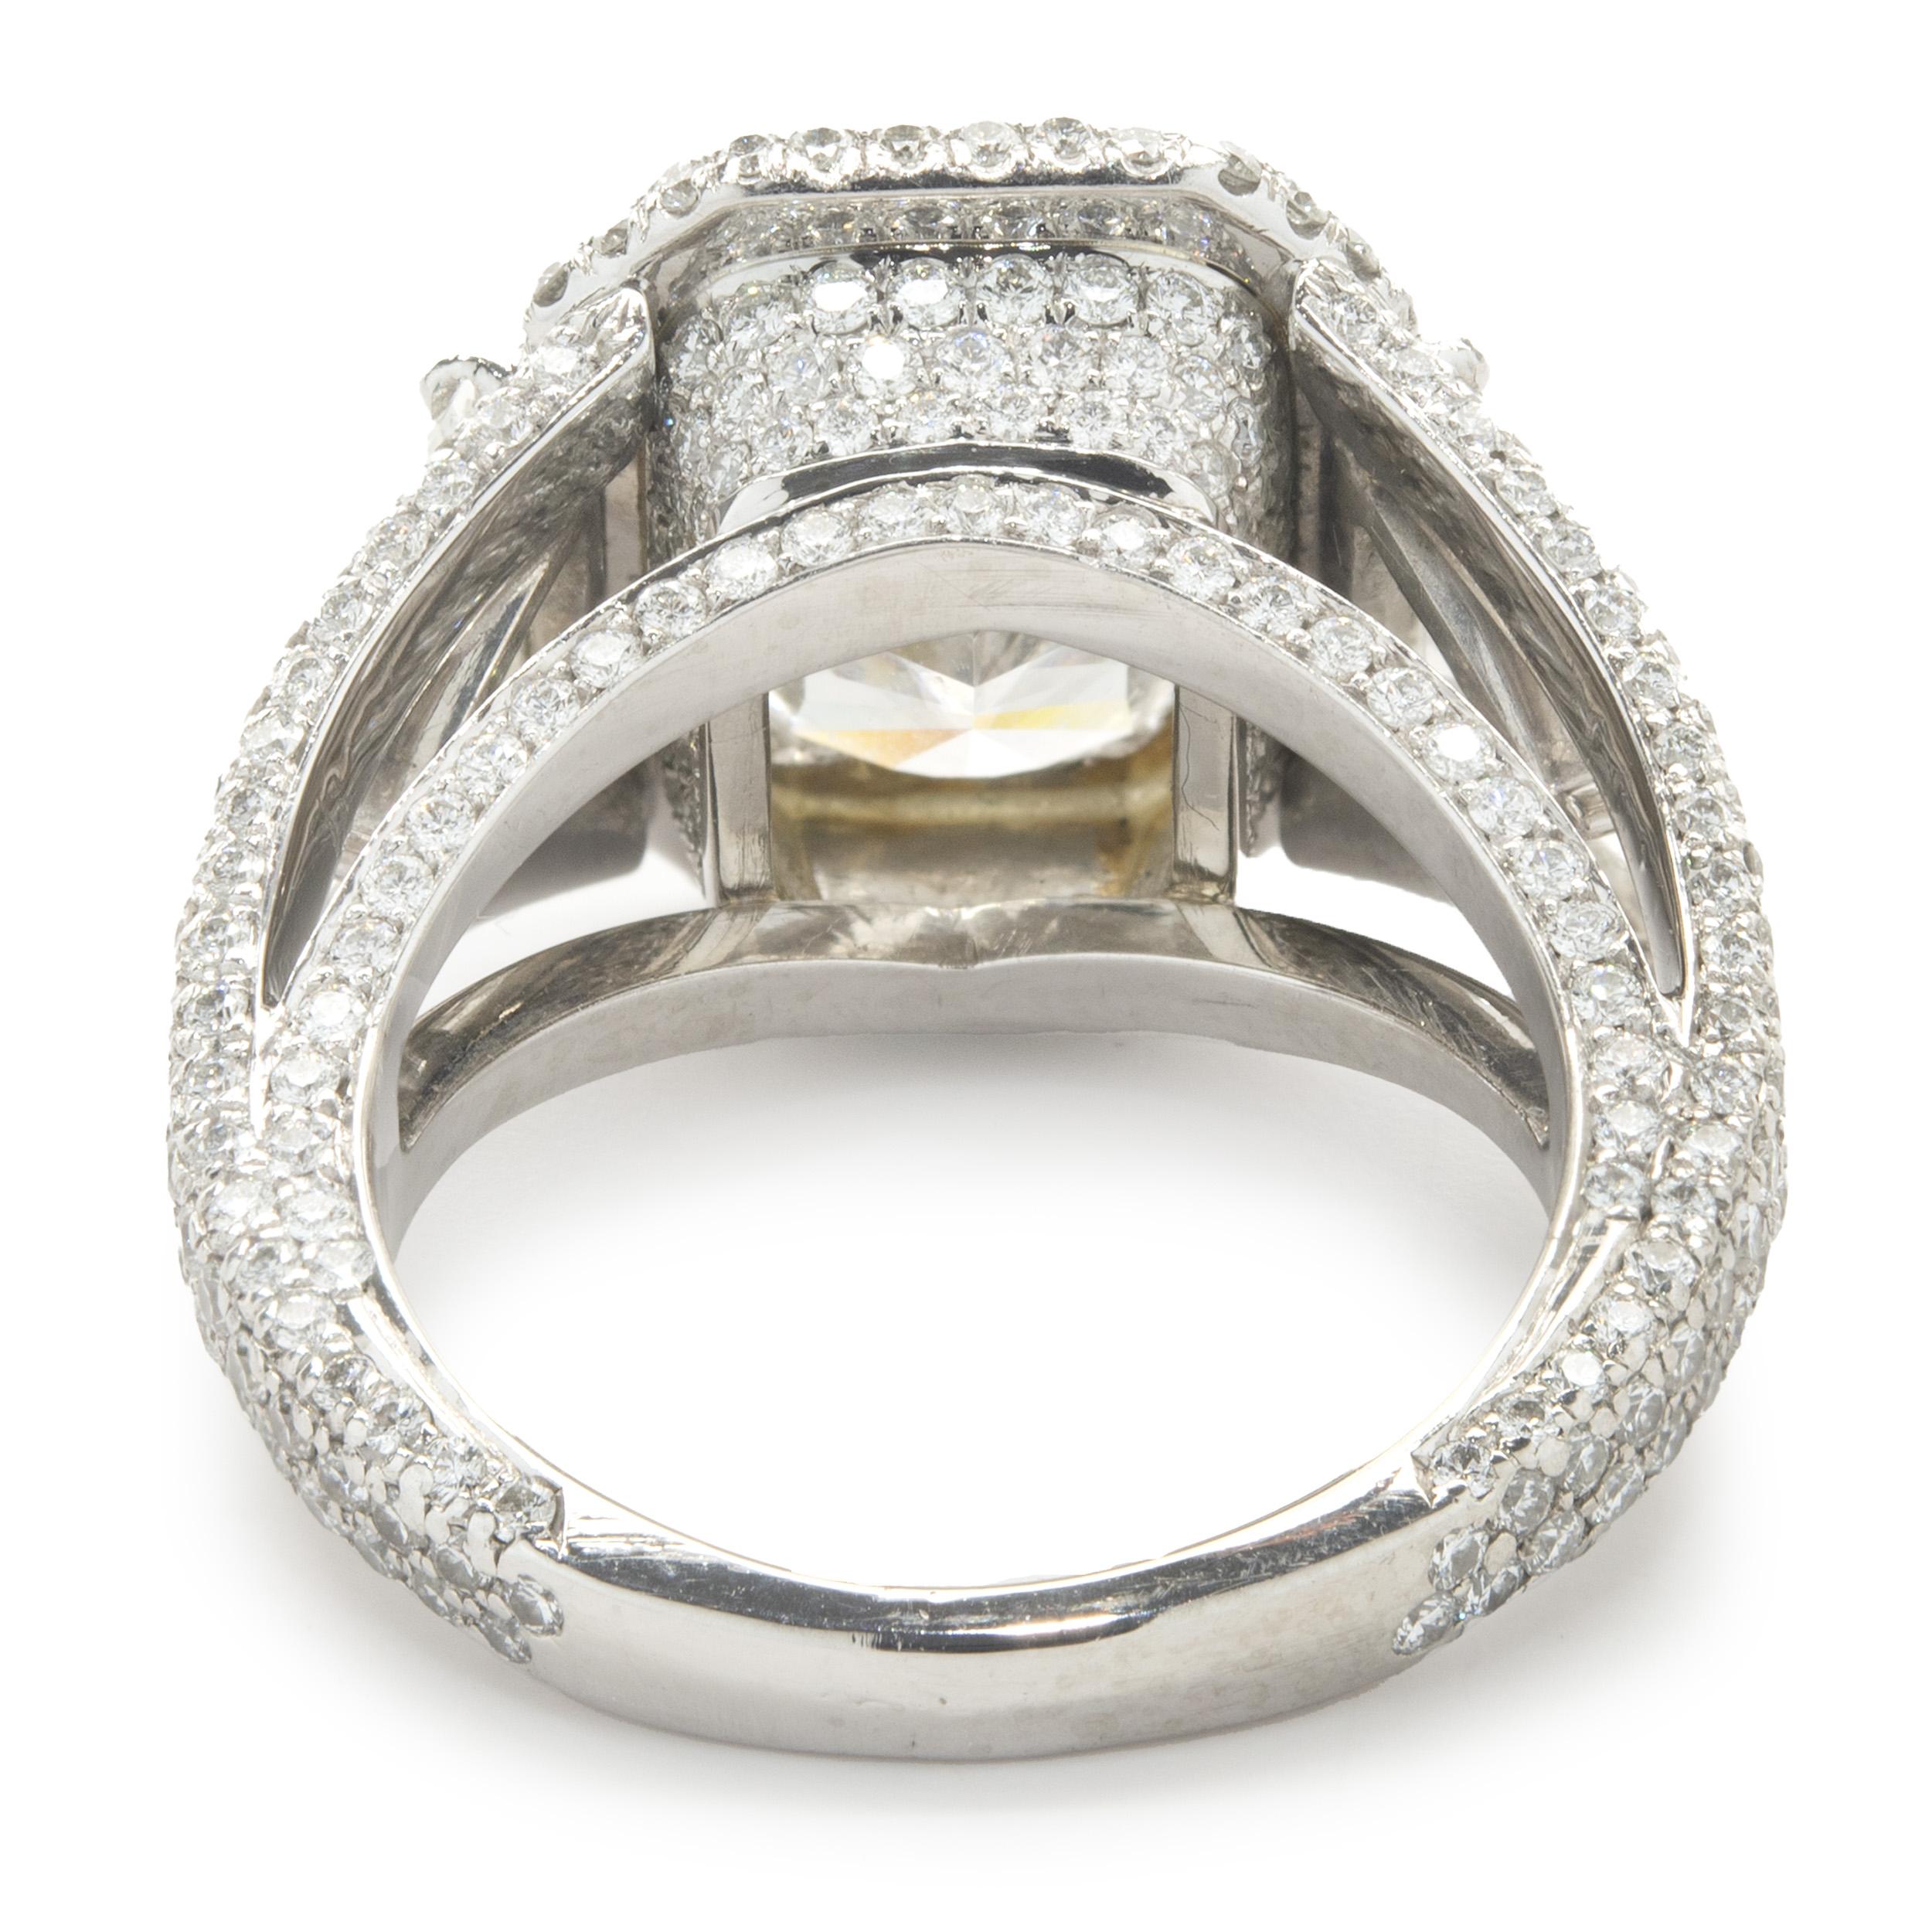 Platinum Radiant Cut Diamond Engagement Ring In Excellent Condition For Sale In Scottsdale, AZ